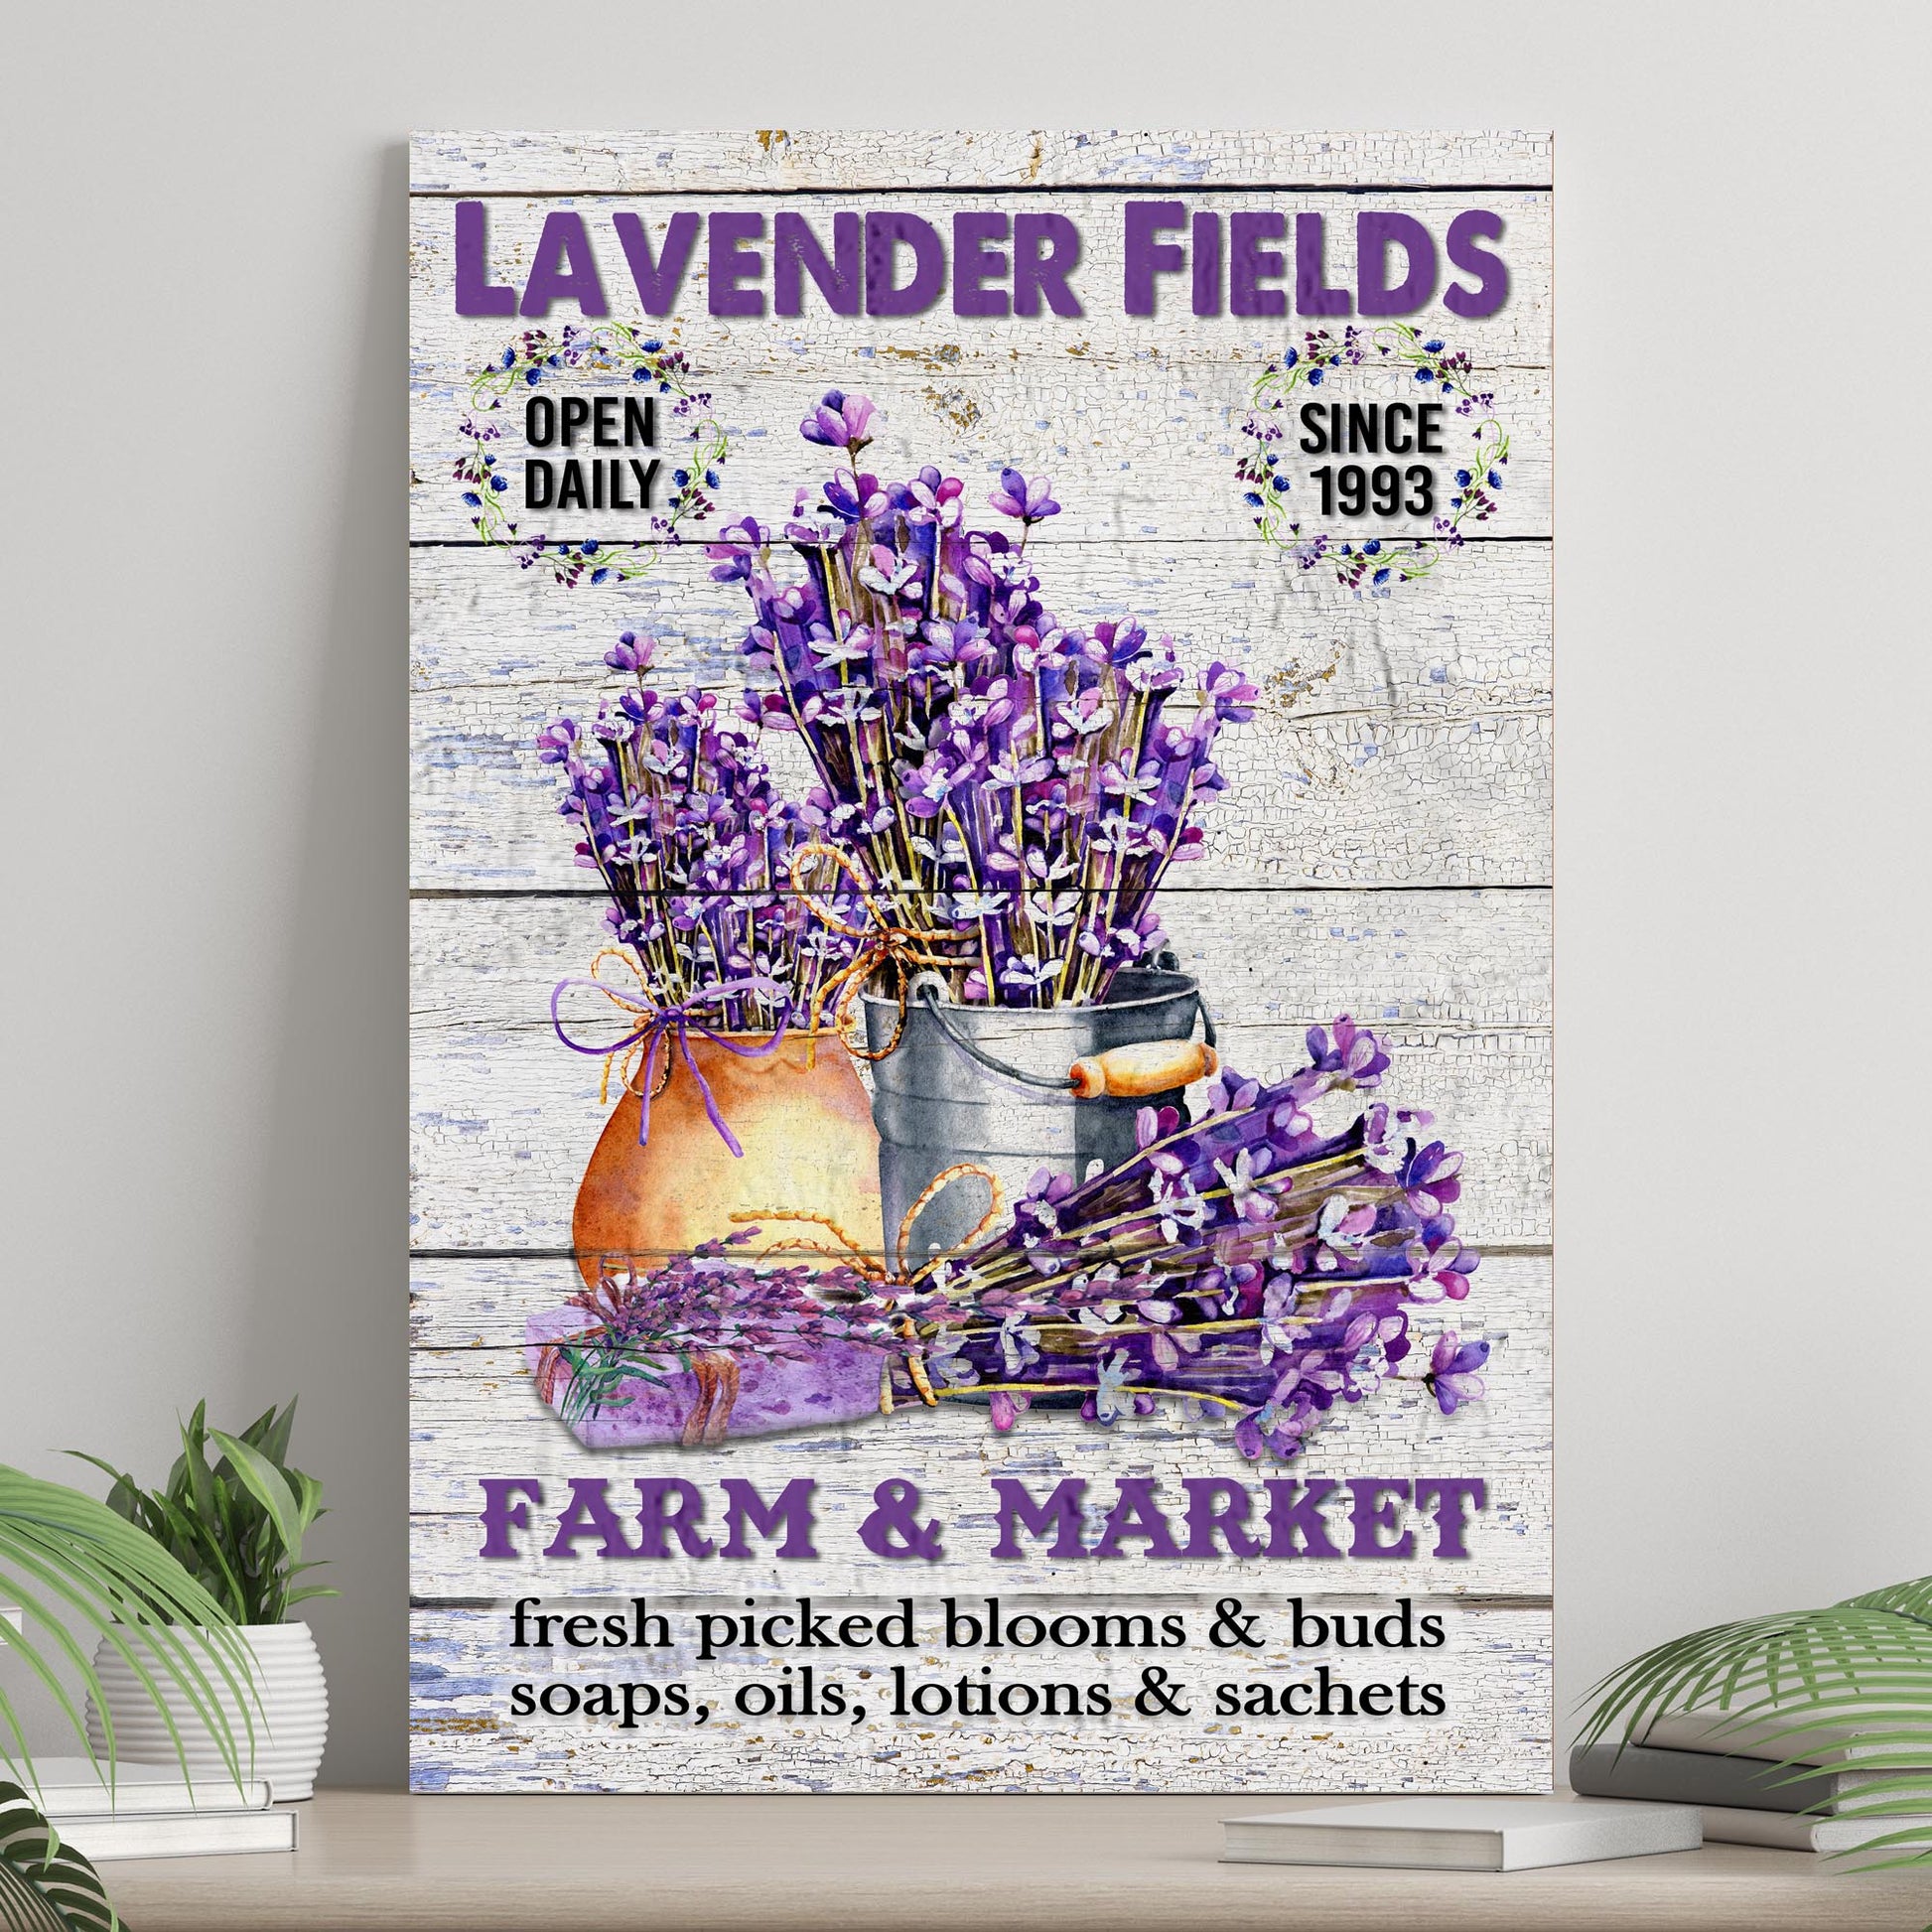 Lavender Fields Farm & Market Sign Style 1 - Image by Tailored Canvases